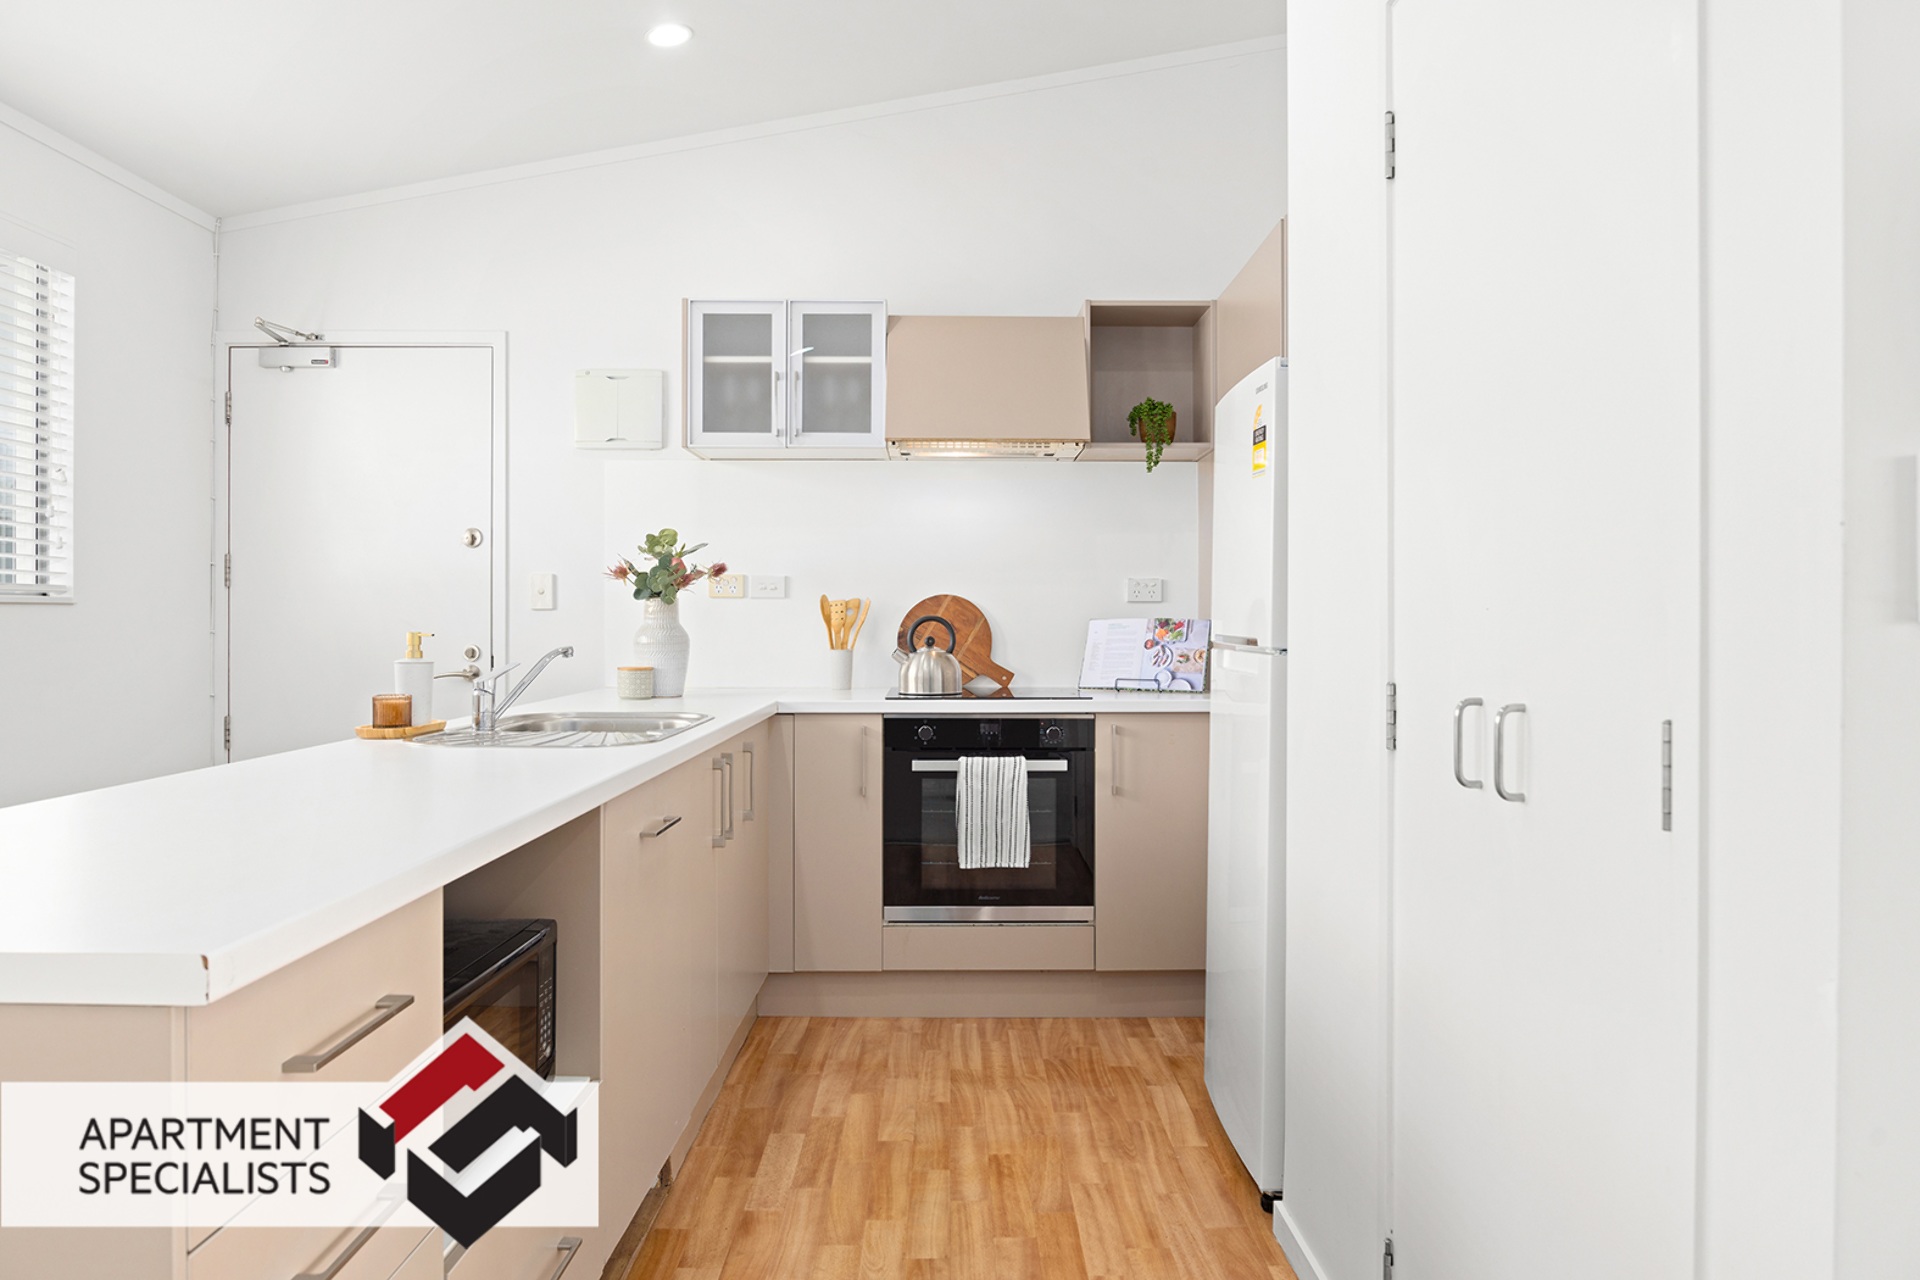 3 | 26 Morningside Drive, Morningside | Apartment Specialists